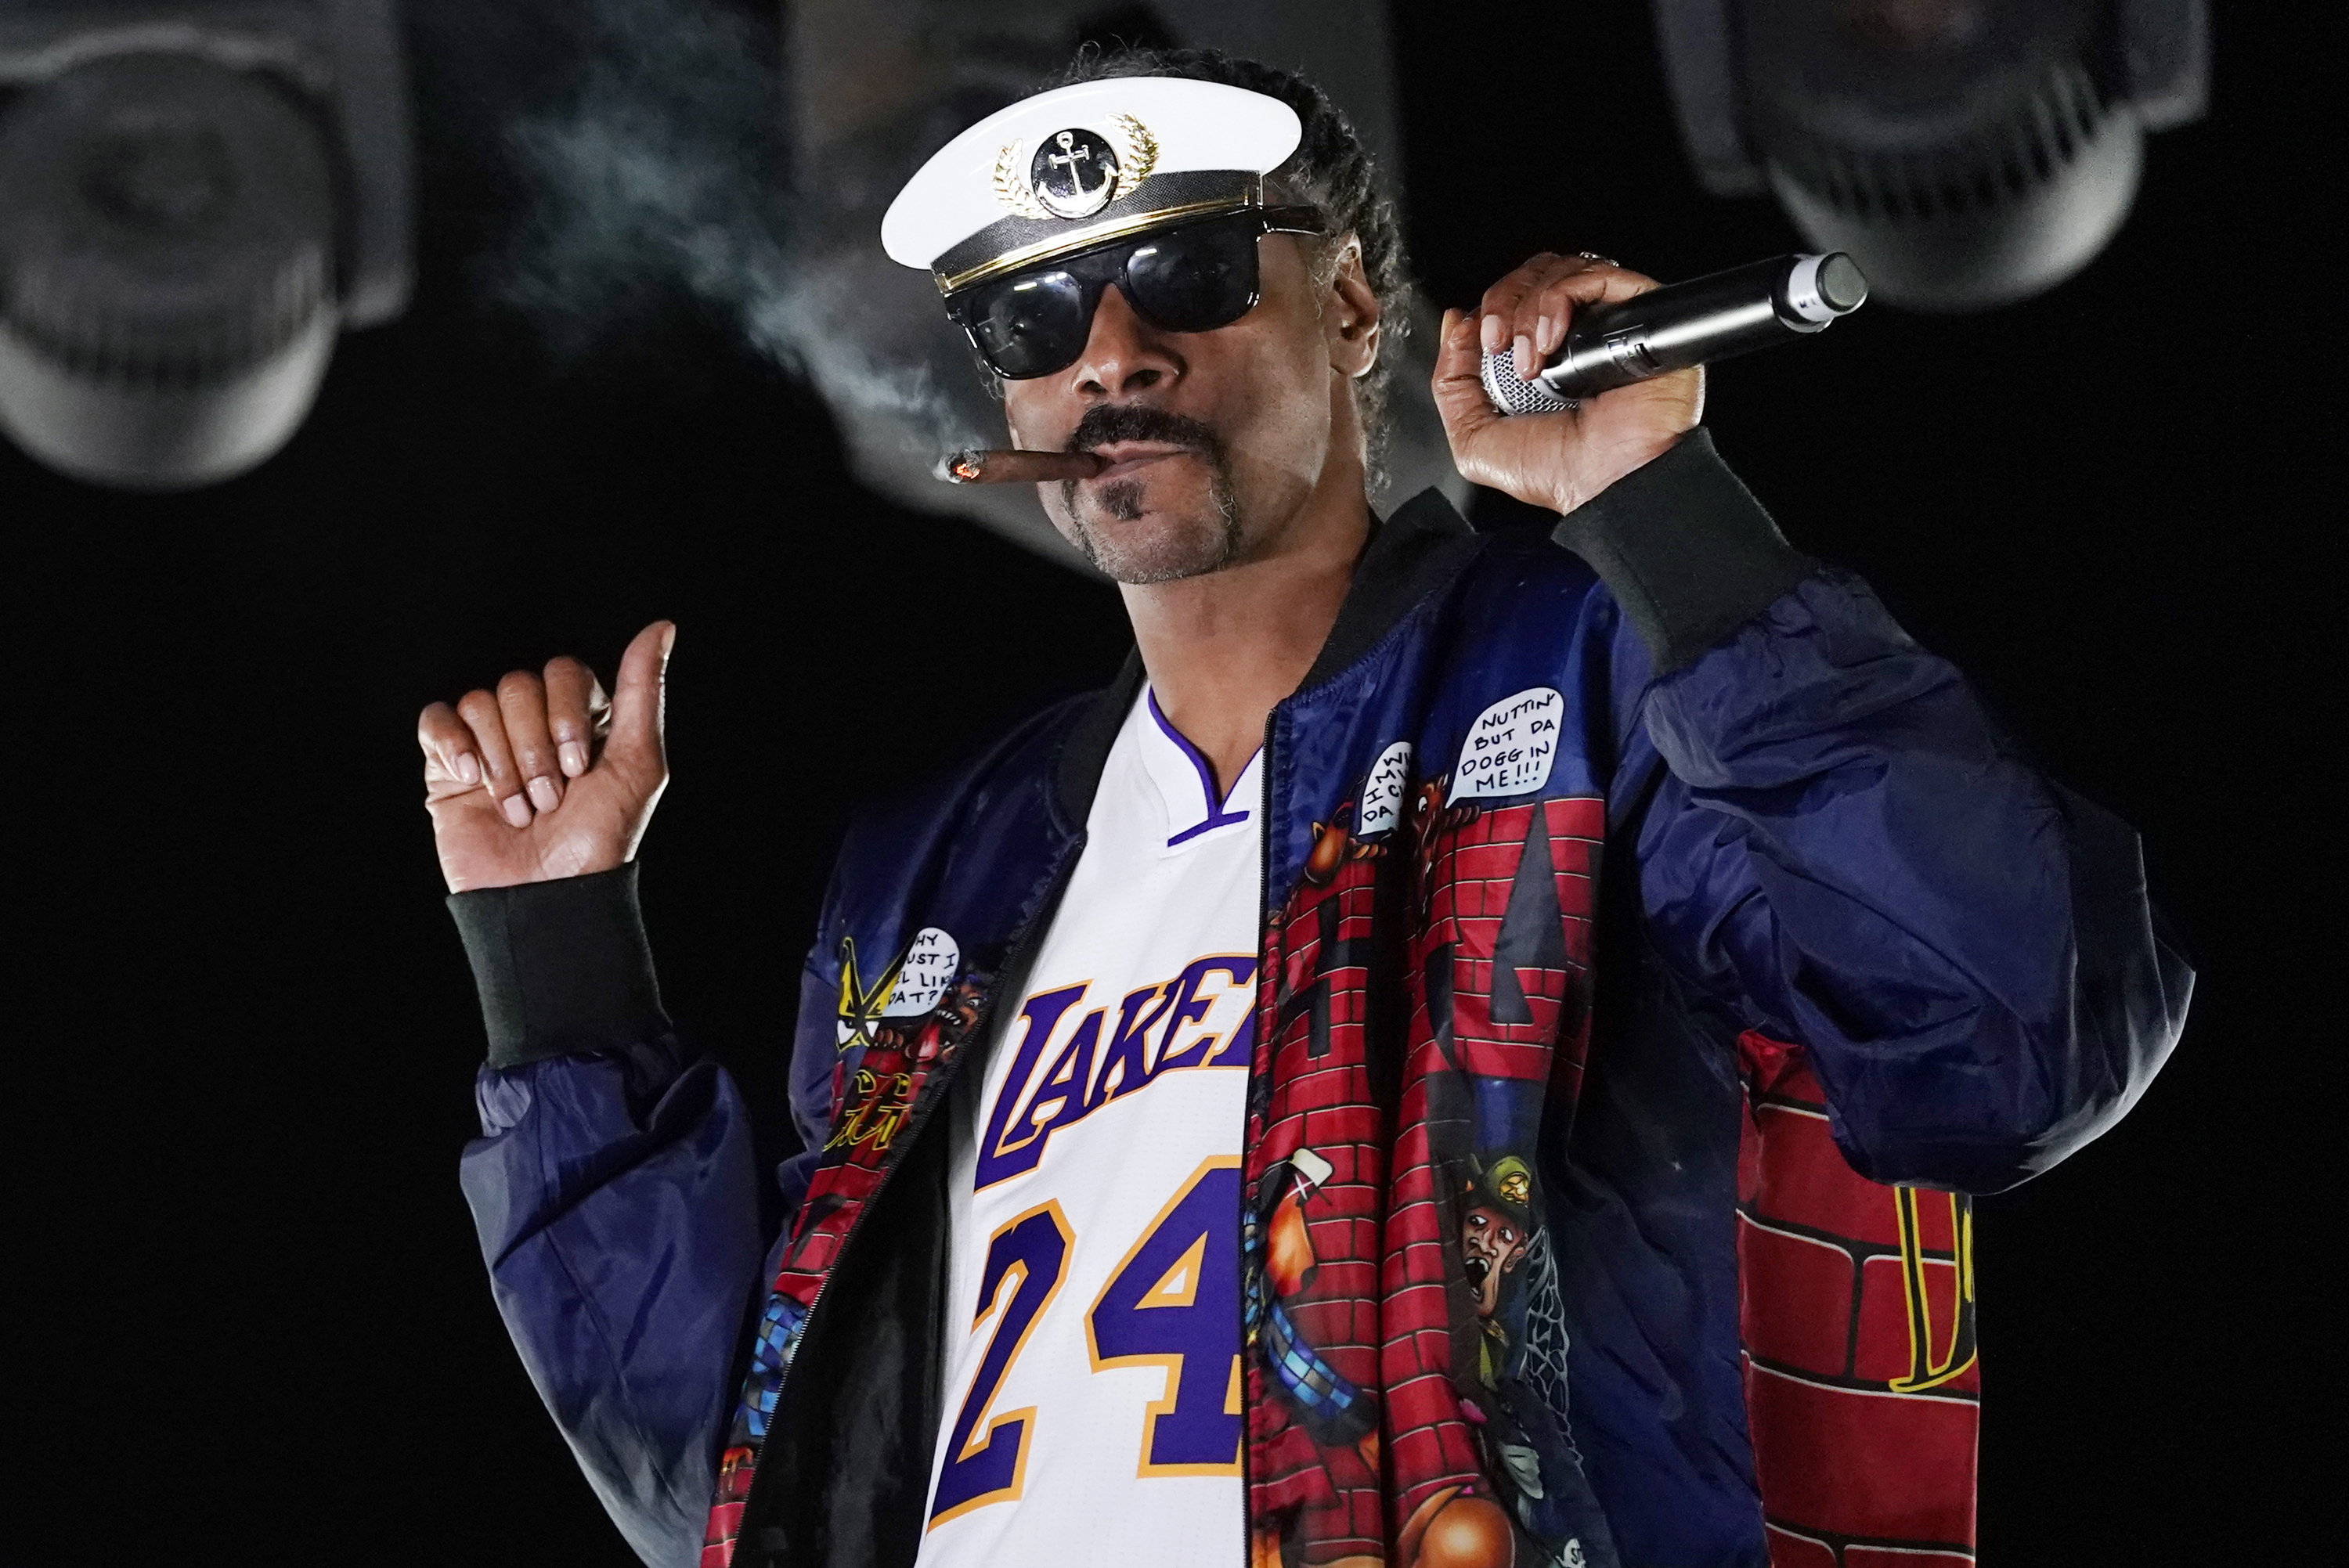 Snoop Dogg tells the players who is starting for the LA Kings on